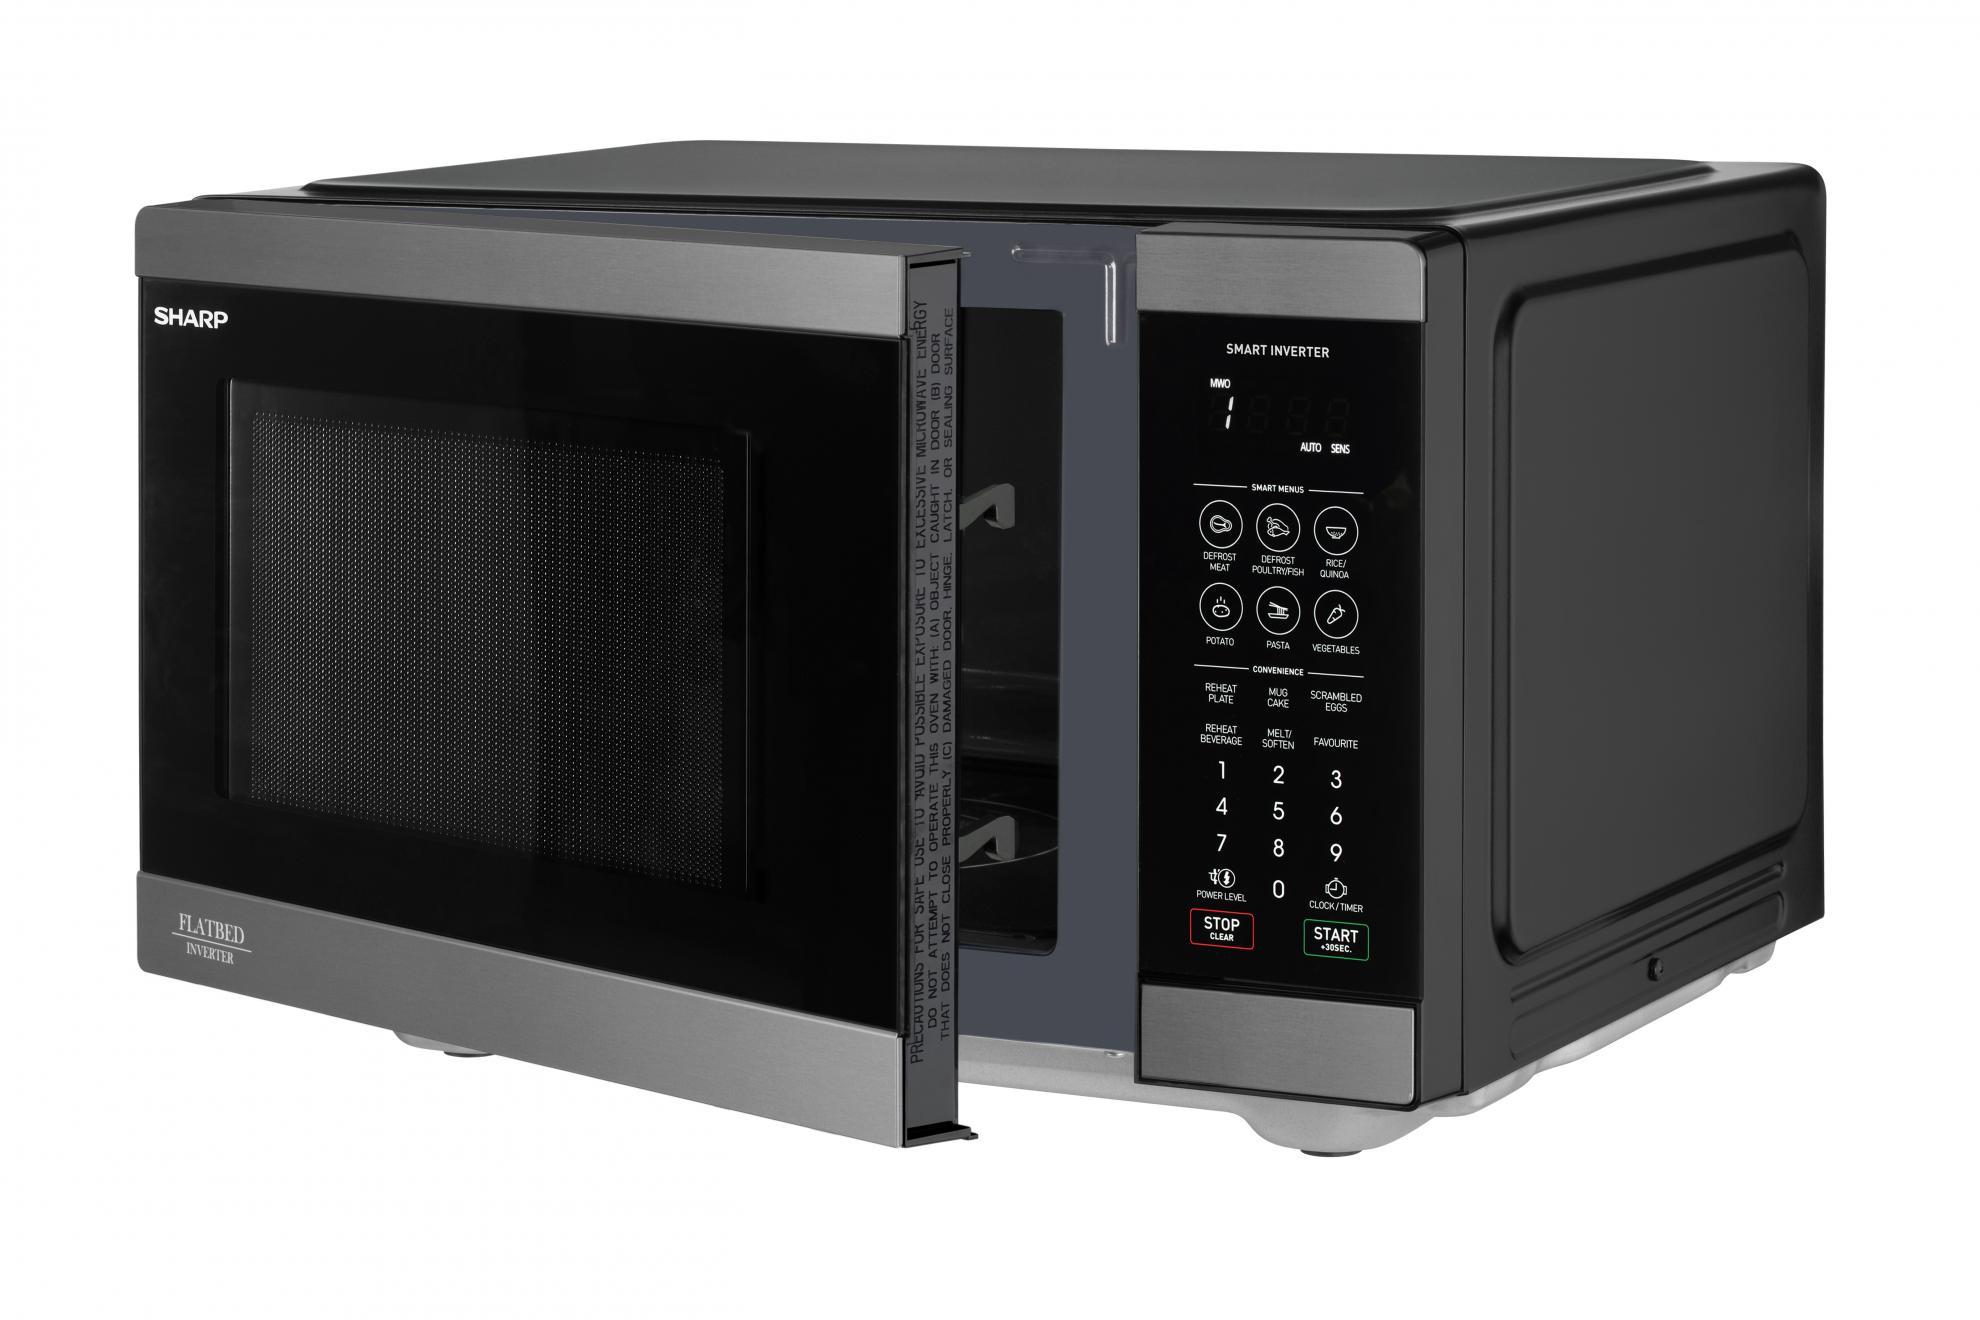 Flatbed Microwave 900W - Black Stainless Steel